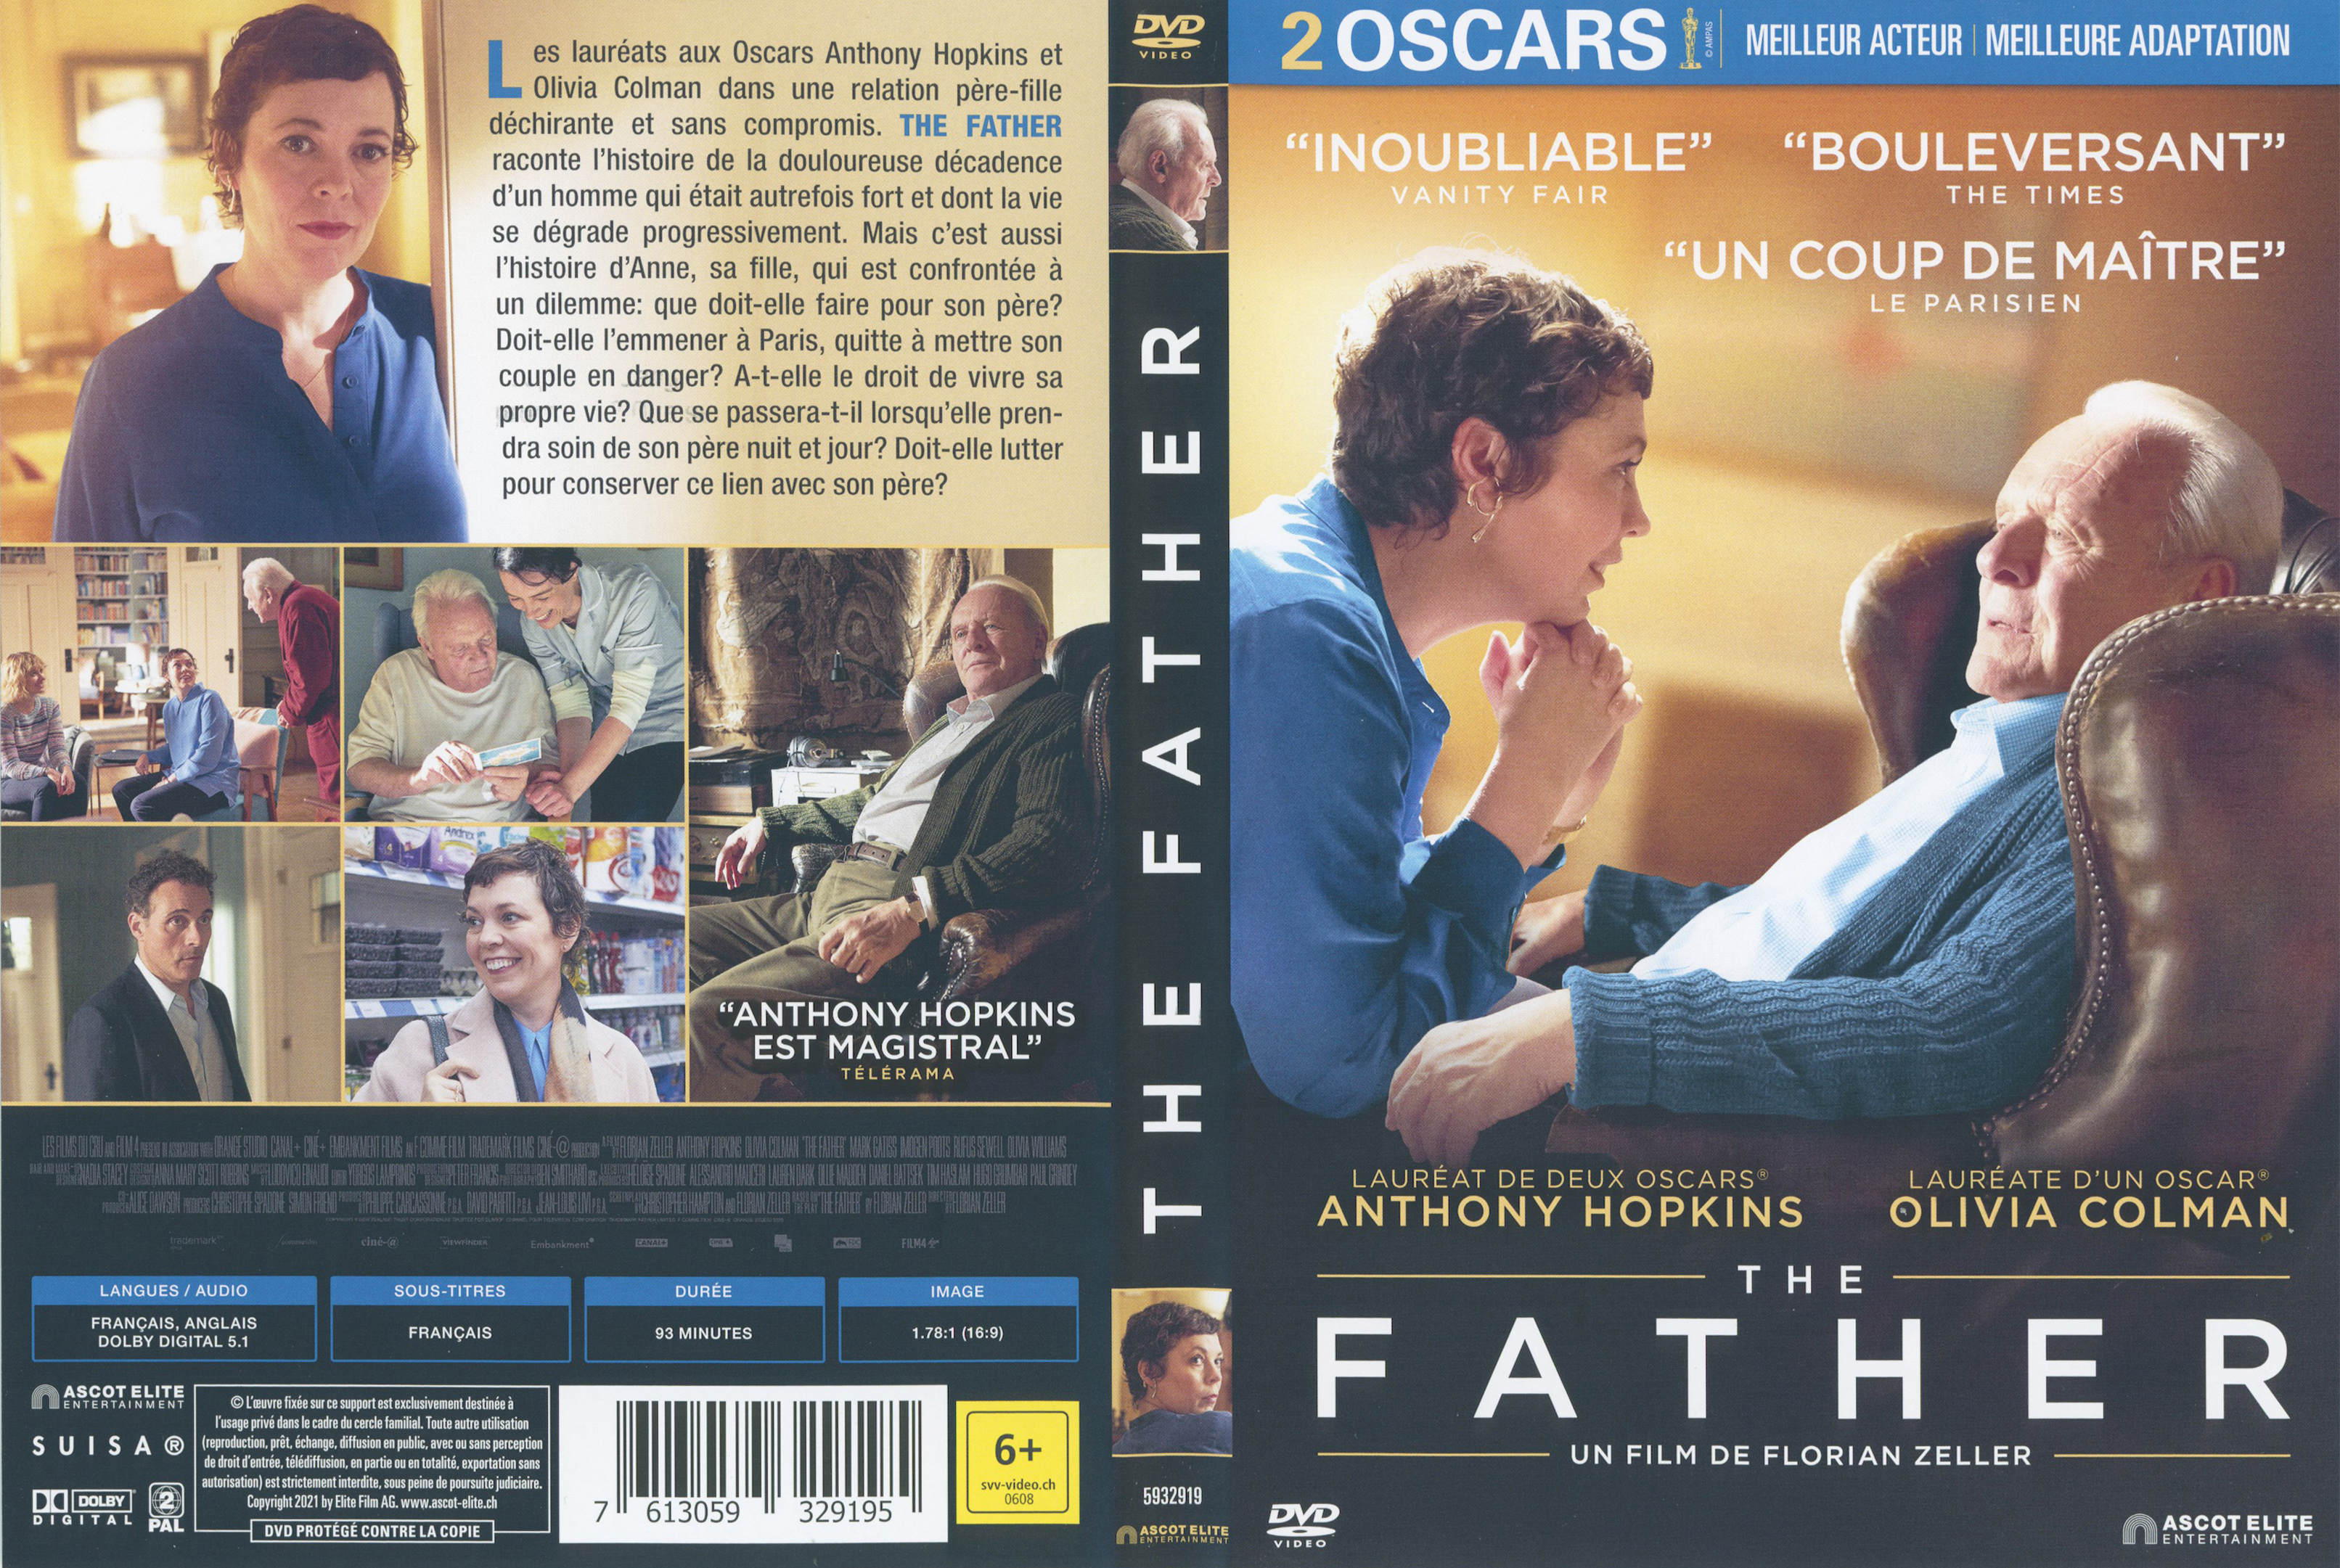 Jaquette DVD The Father v2